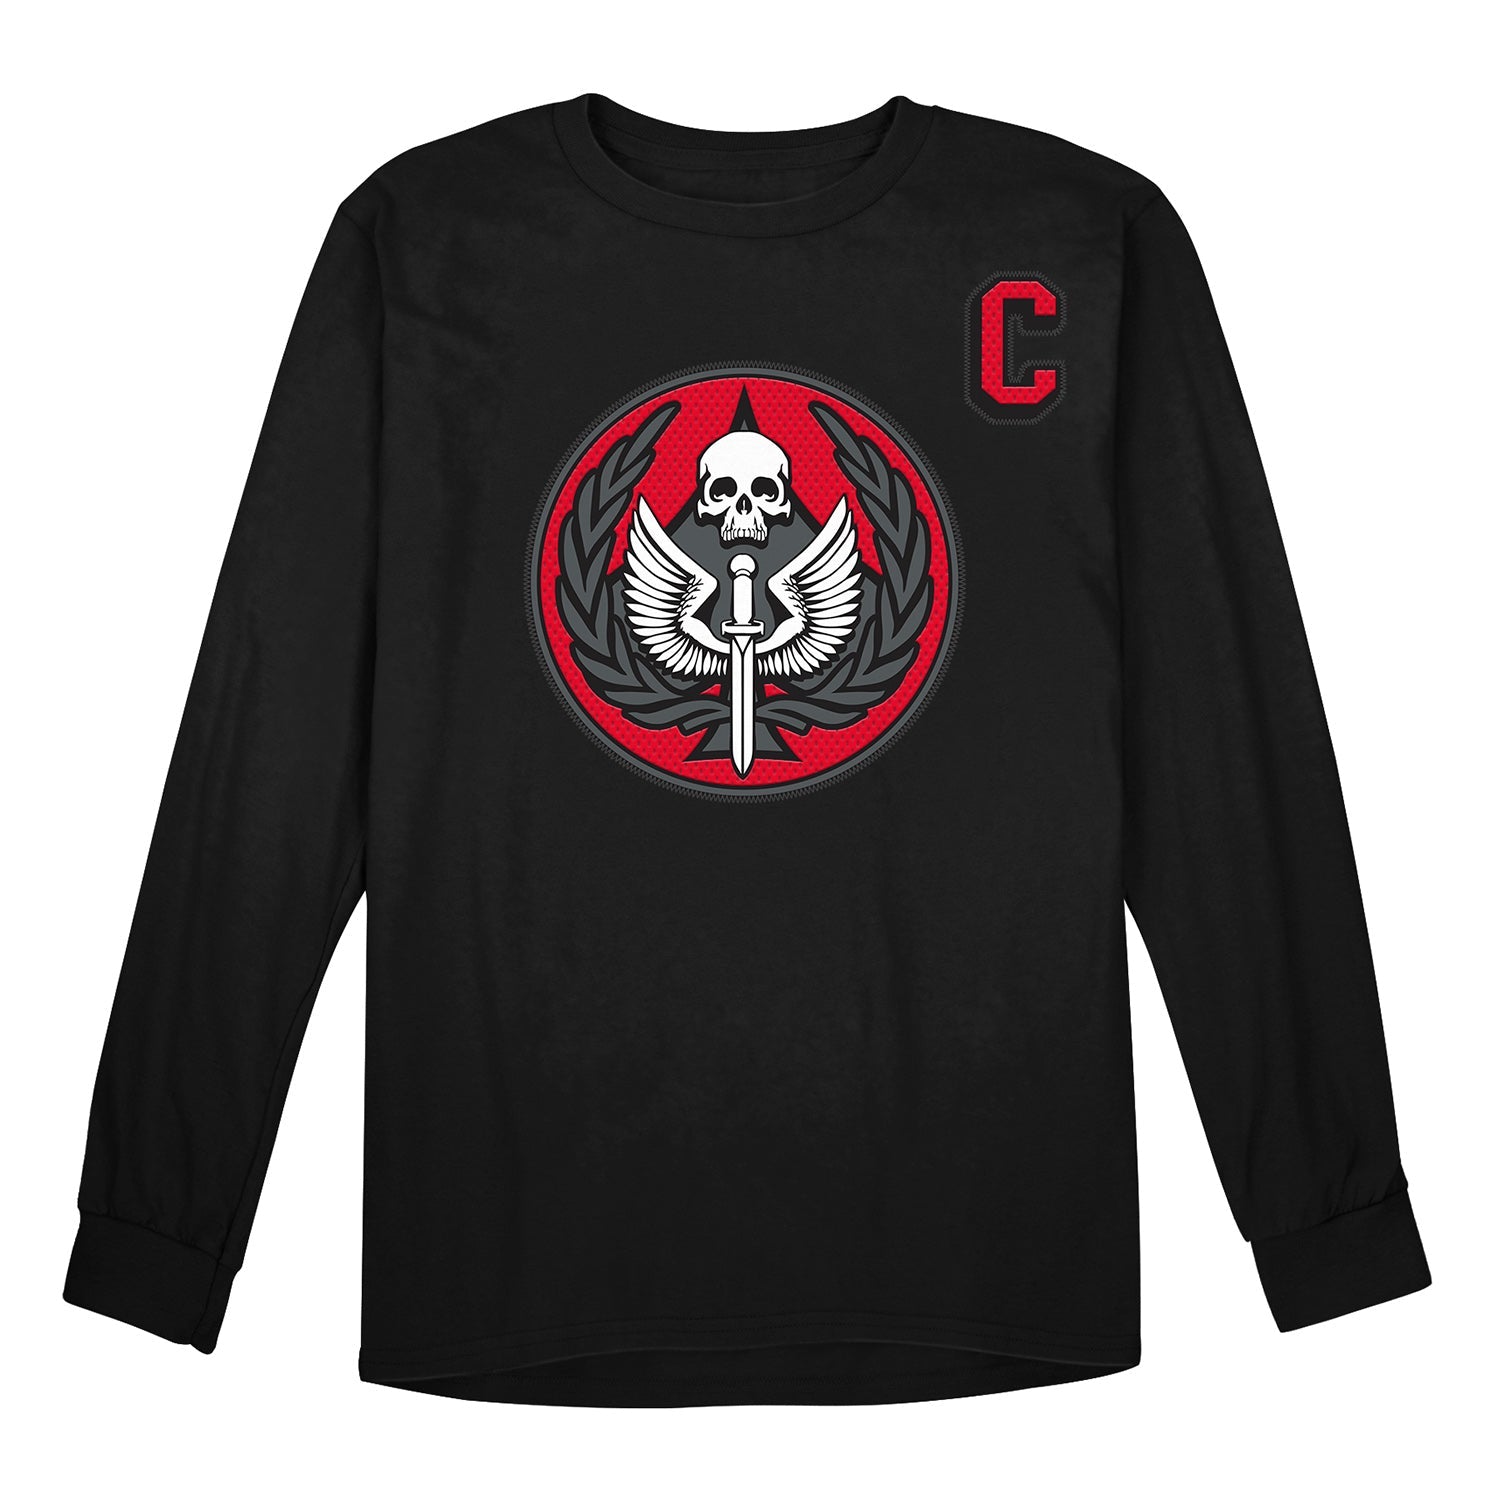 Call of Duty Hockey Task Force 141 Black Long Sleeve T-Shirt- Front View